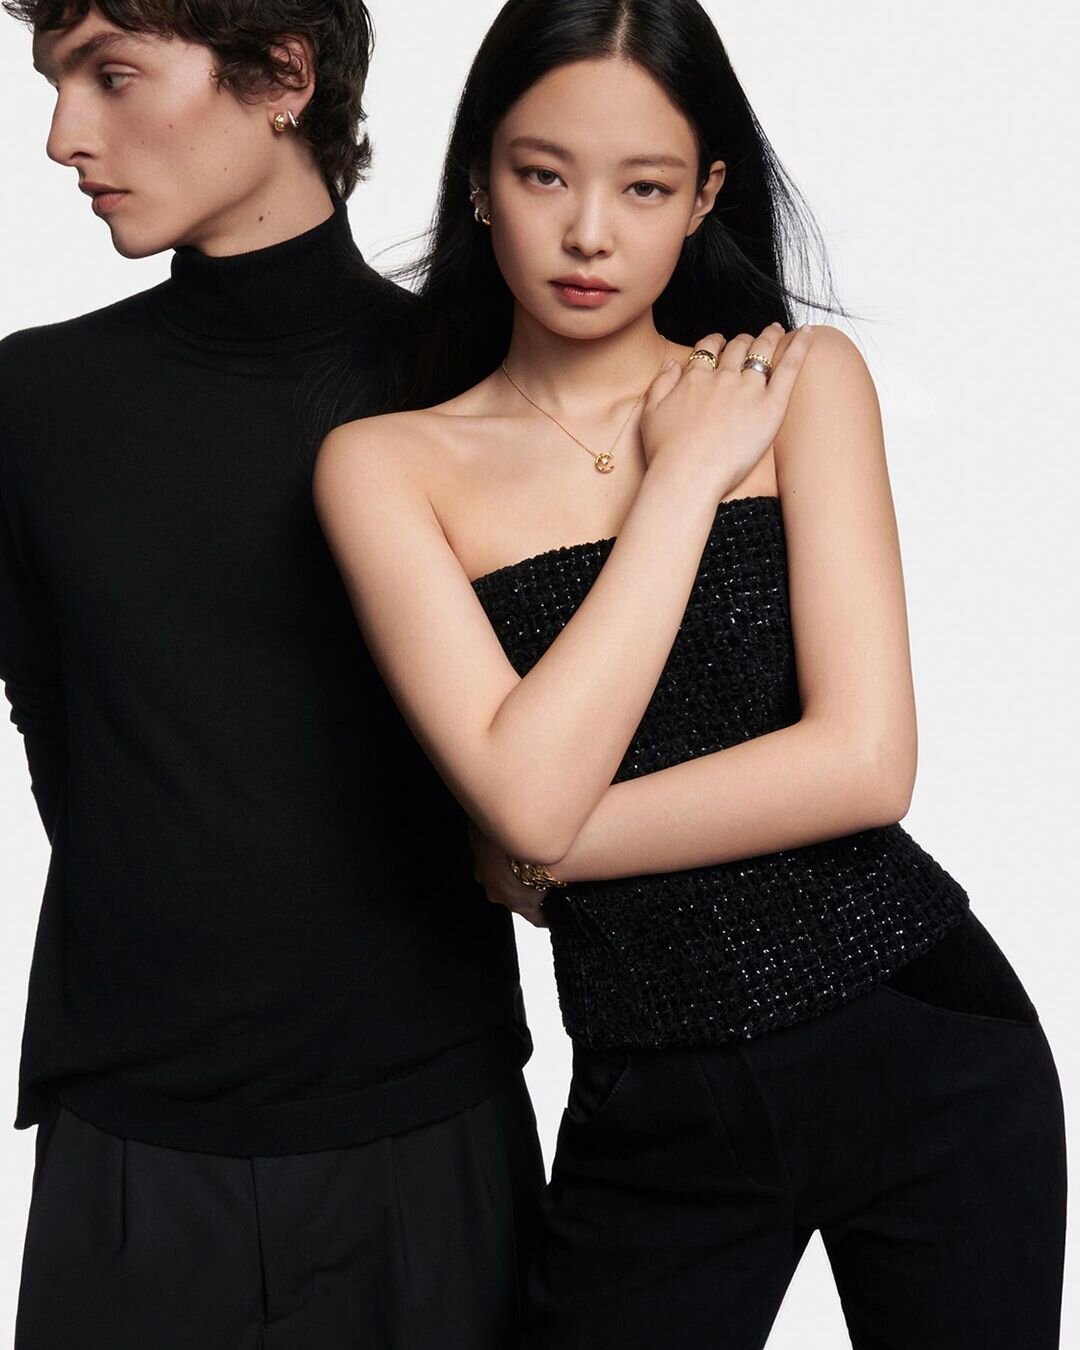 https://kpopping.com/documents/20/5/BLACKPINK-JENNIE-for-CHANEL-COCO-CRUSH-2023-Campaign-documents-1(1).jpeg?v=a6674